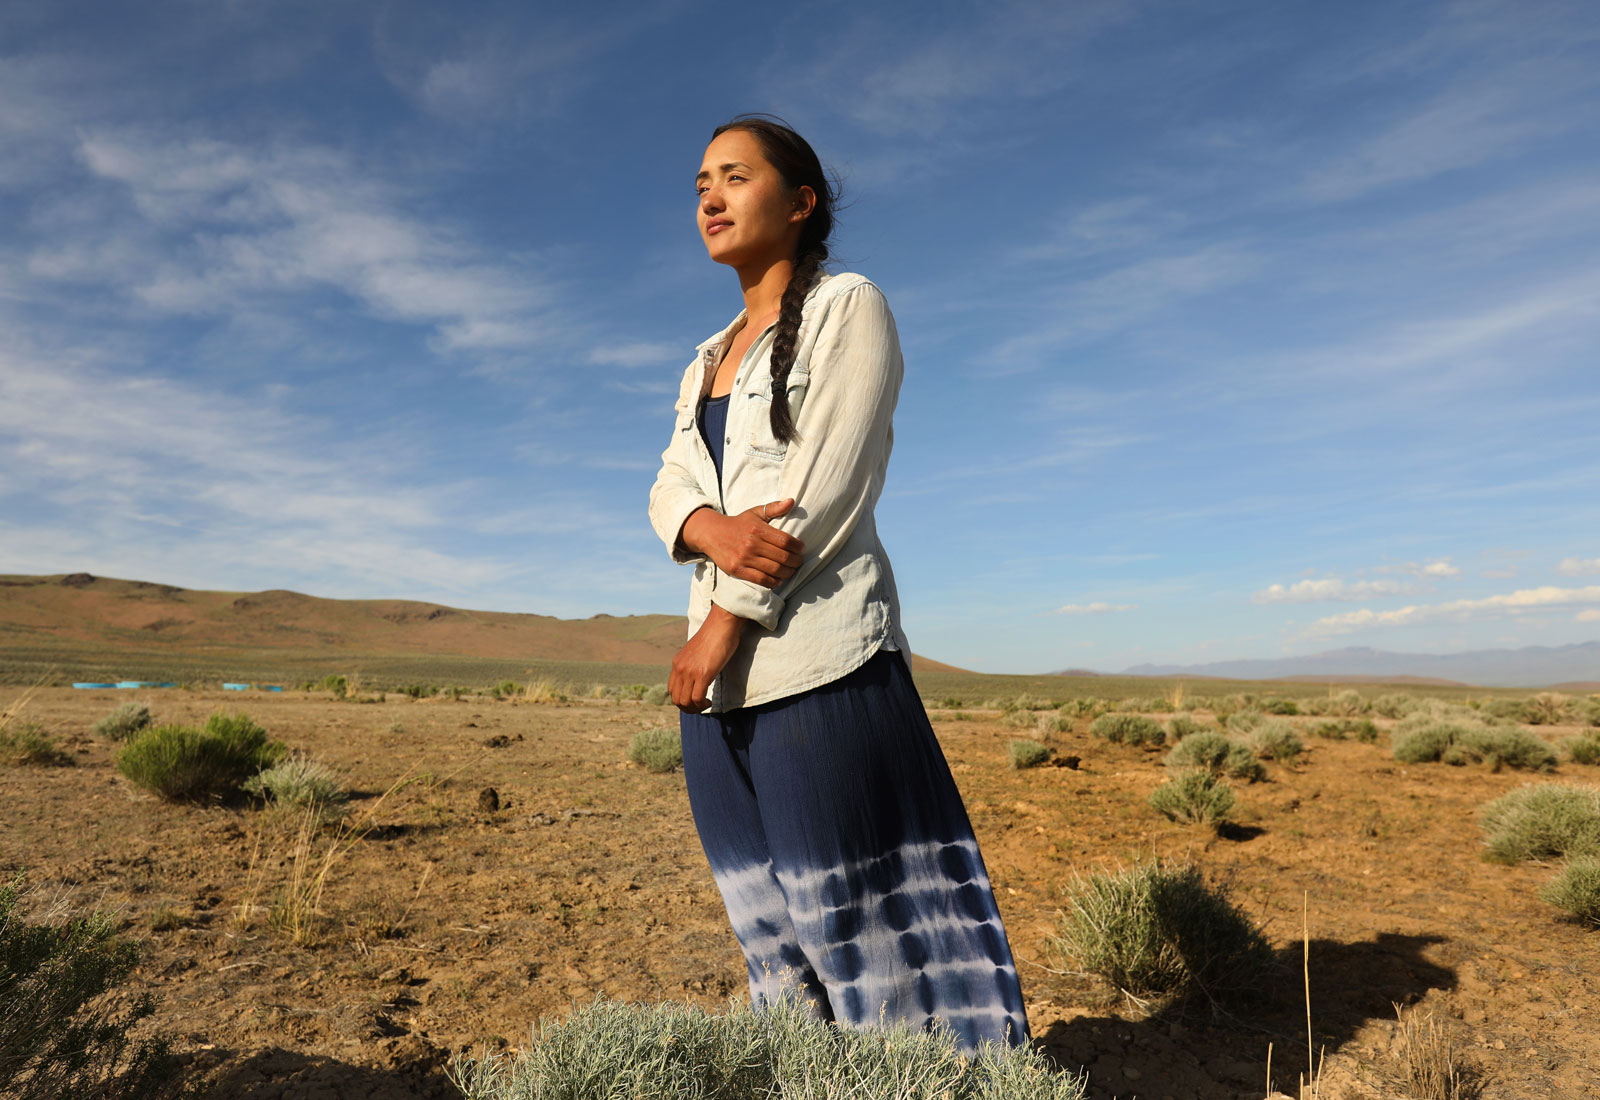 Daranda Hinkey, a member of the Fort McDermitt Paiute Shoshone tribe, stands in a field of sage brush